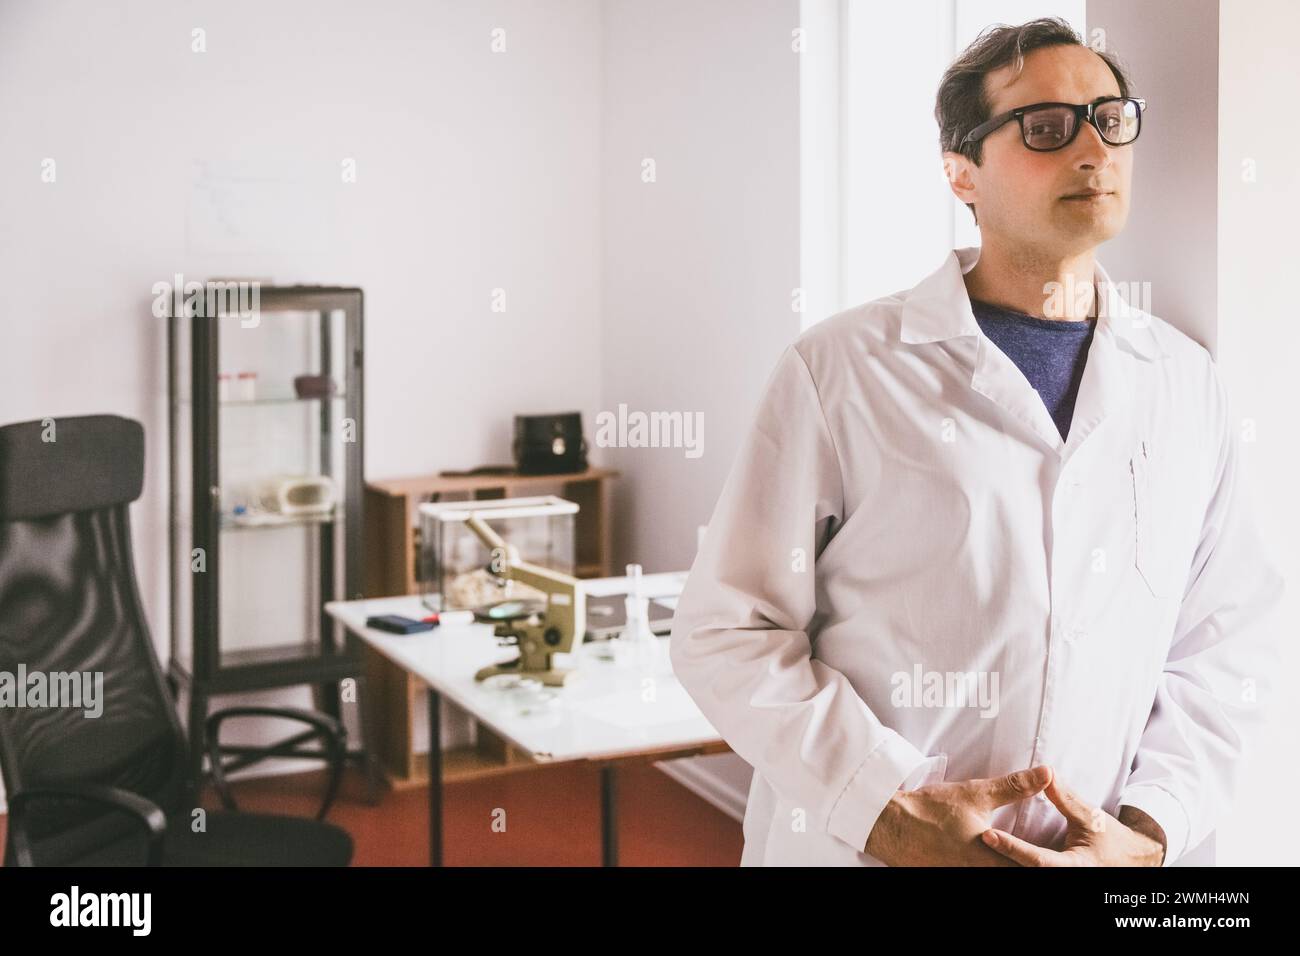 An adult male Caucasian scientist in glasses and a white coat stands and looks tiredly forward against the backdrop of the laboratory. Stock Photo